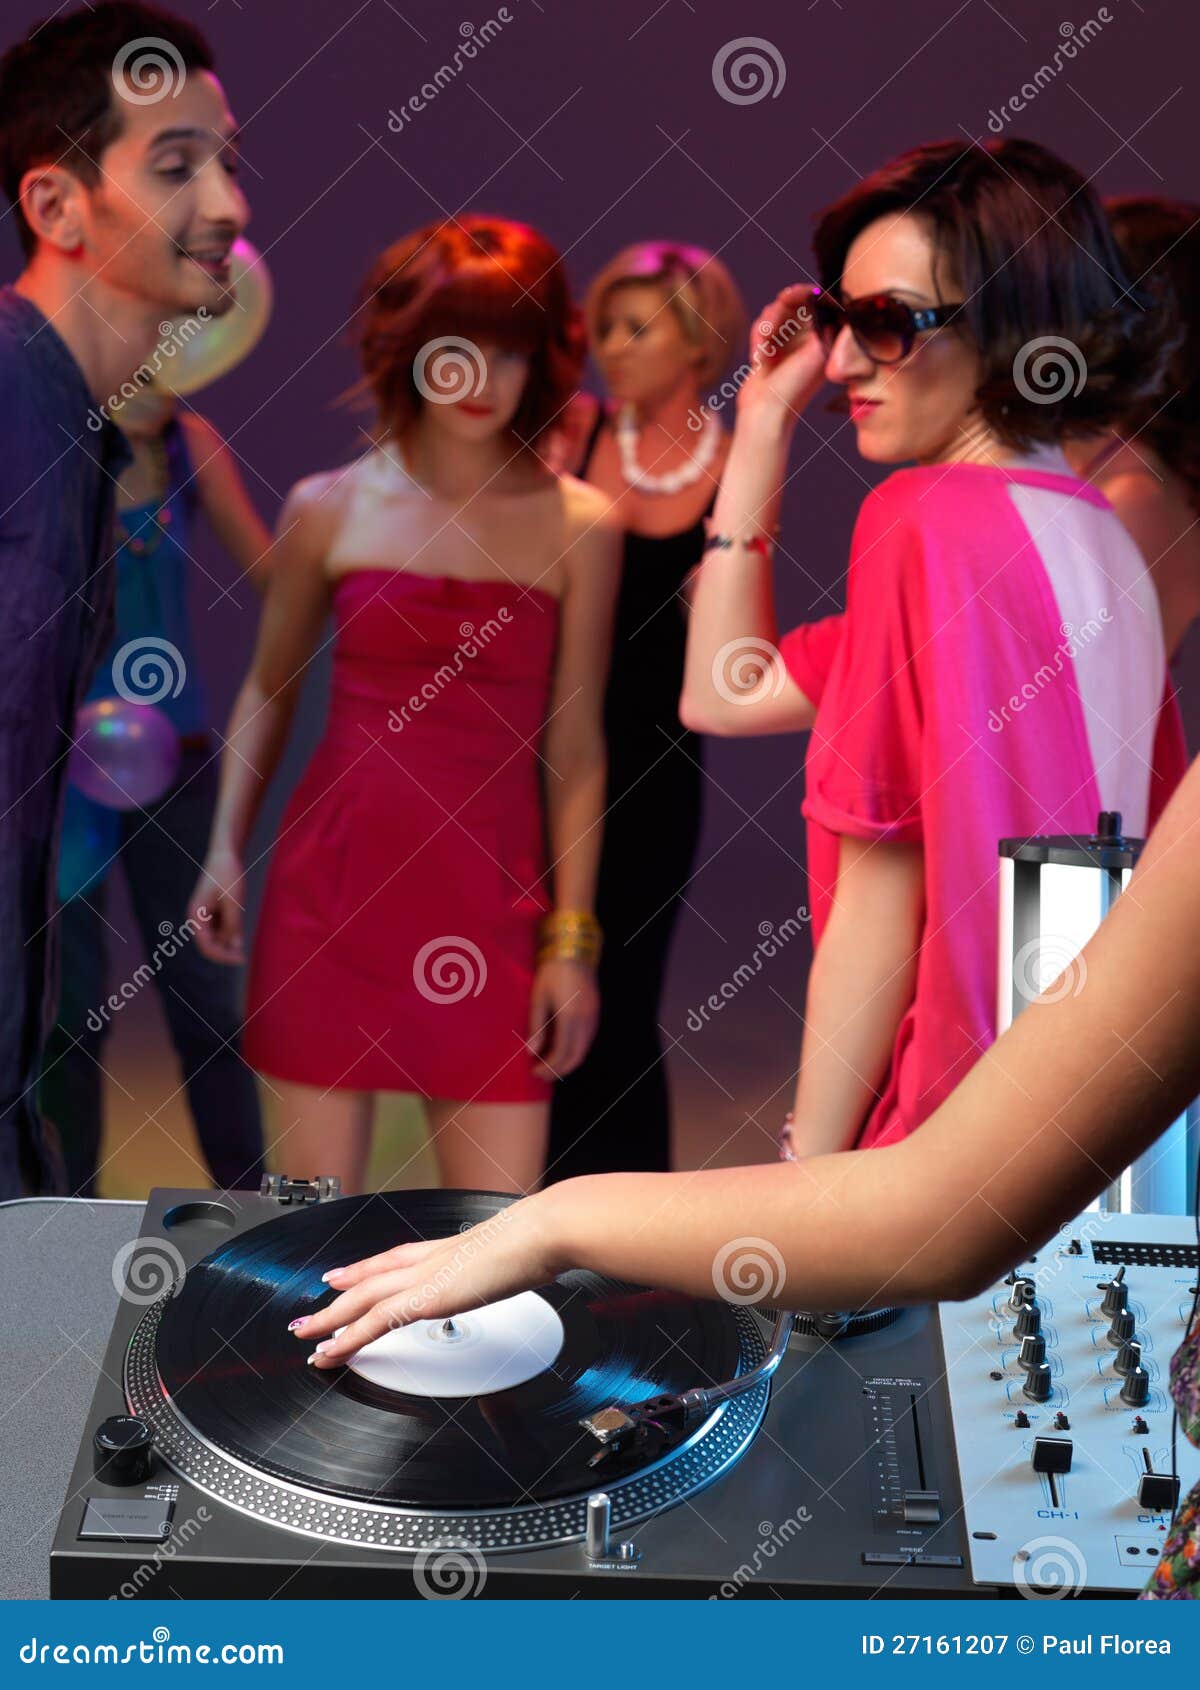 Dj S Turntable Closeup in a Night Club Stock Image - Image of happy ...